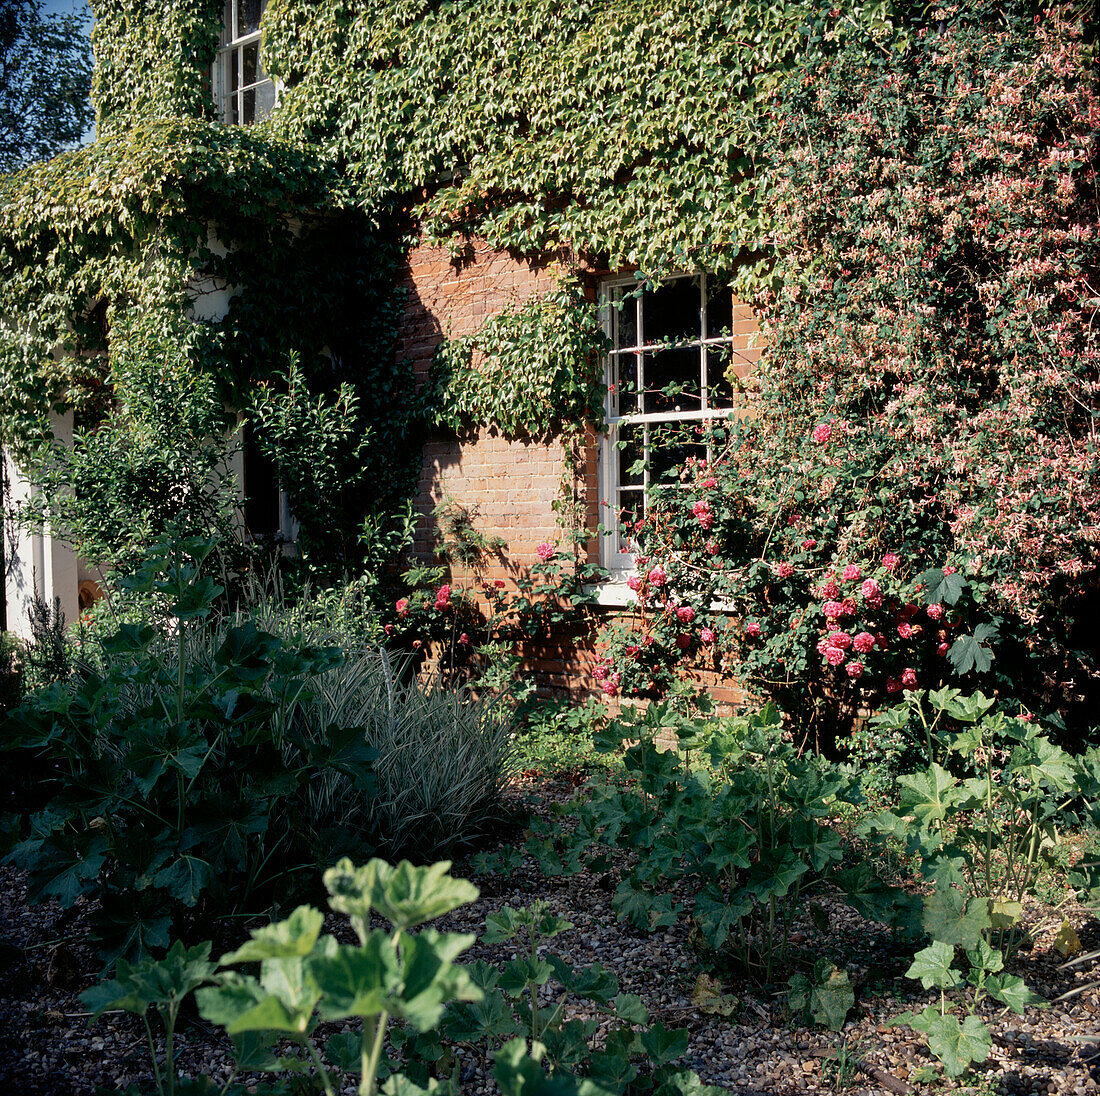 Exterior of a period English house covered with ivy and Virginia creeper